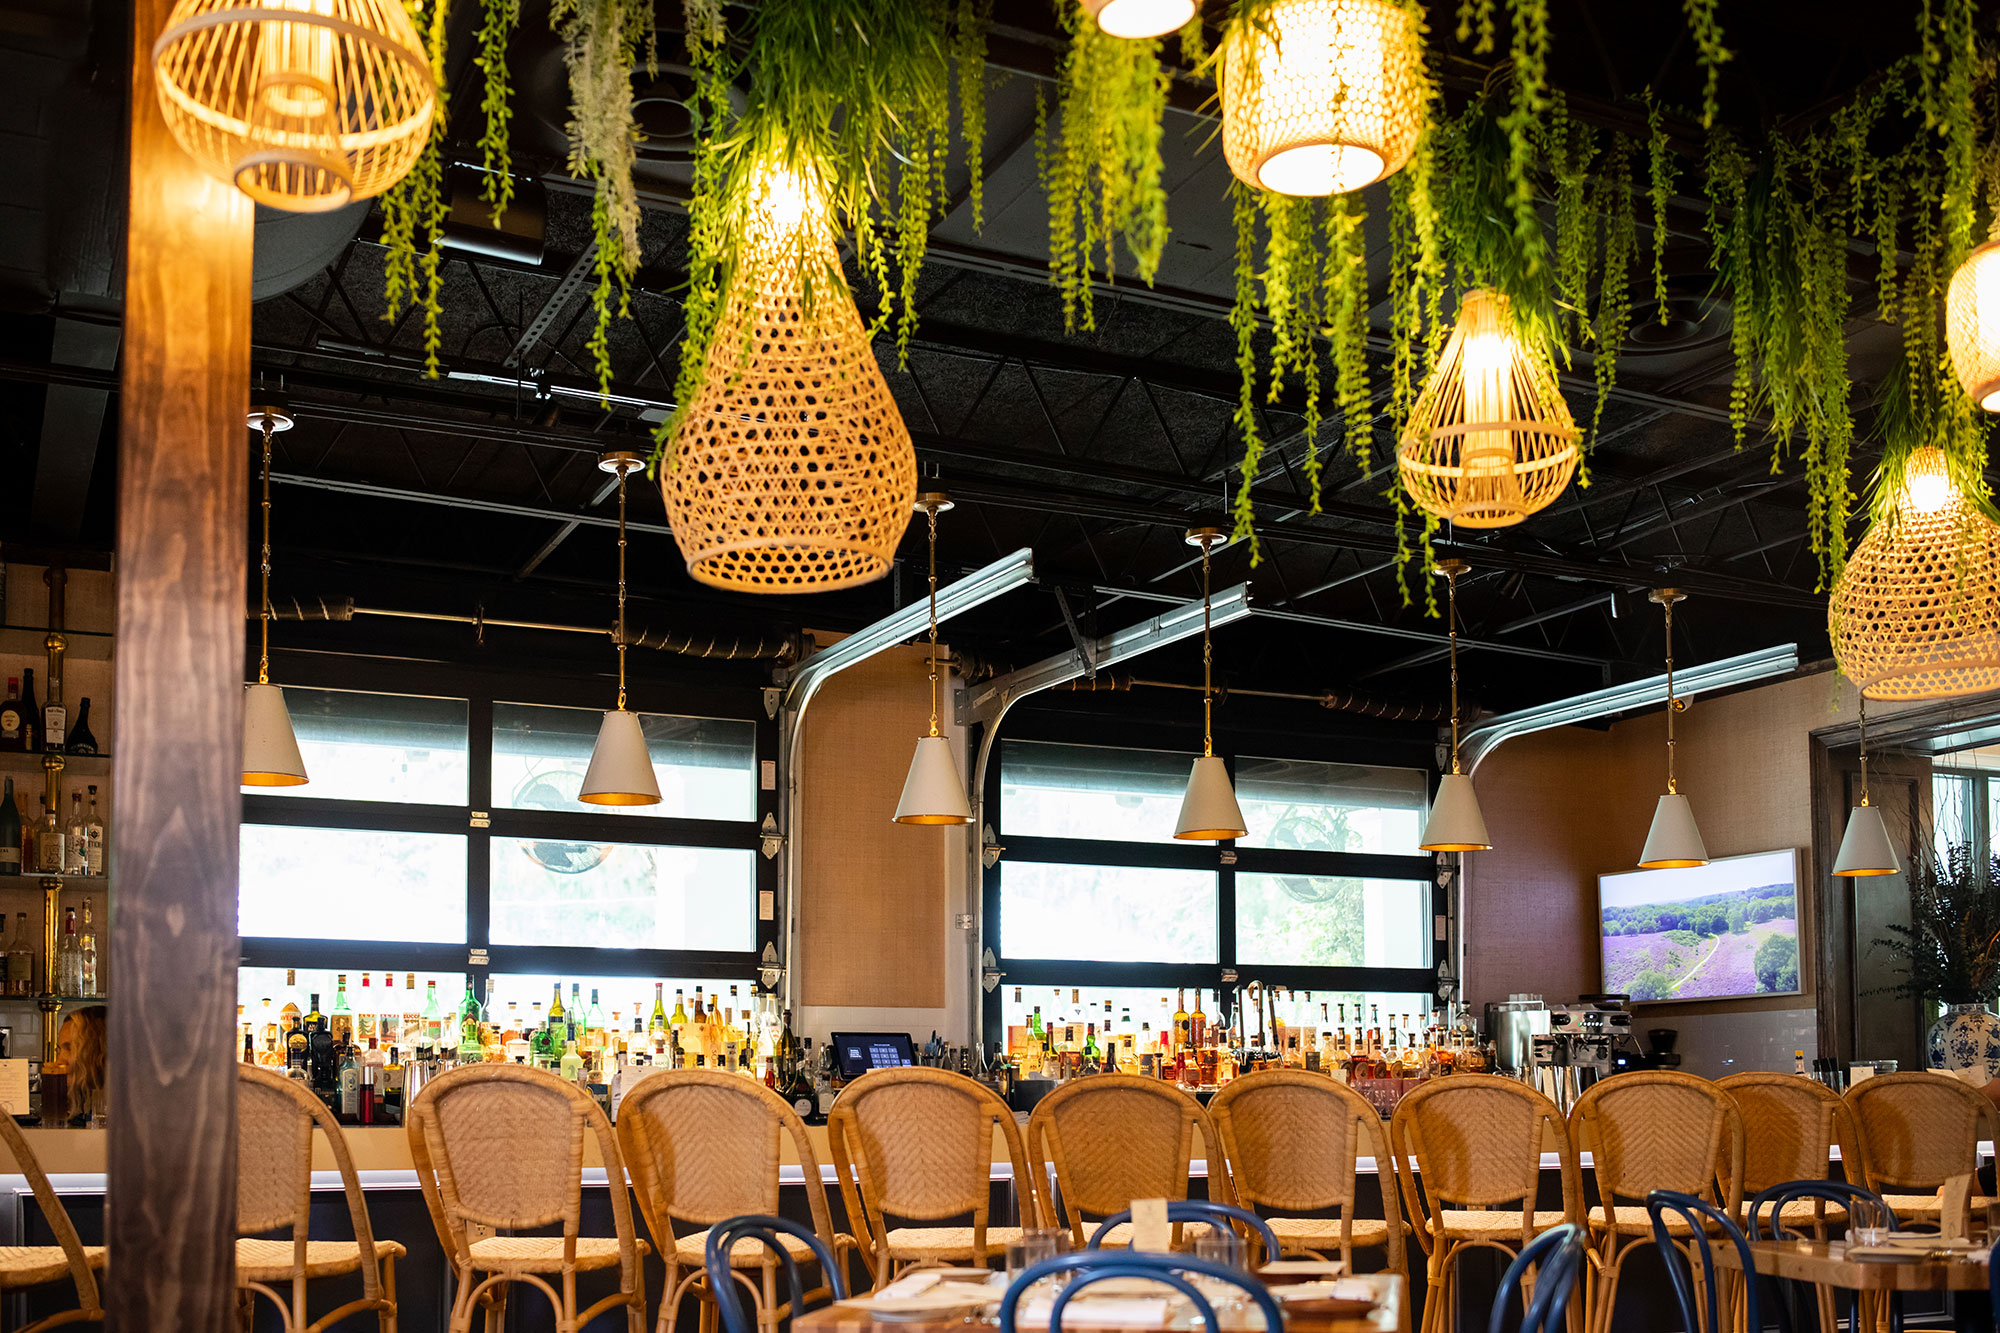 Interior, bar and seating area, rattan pendant light and greenery on the ceiling